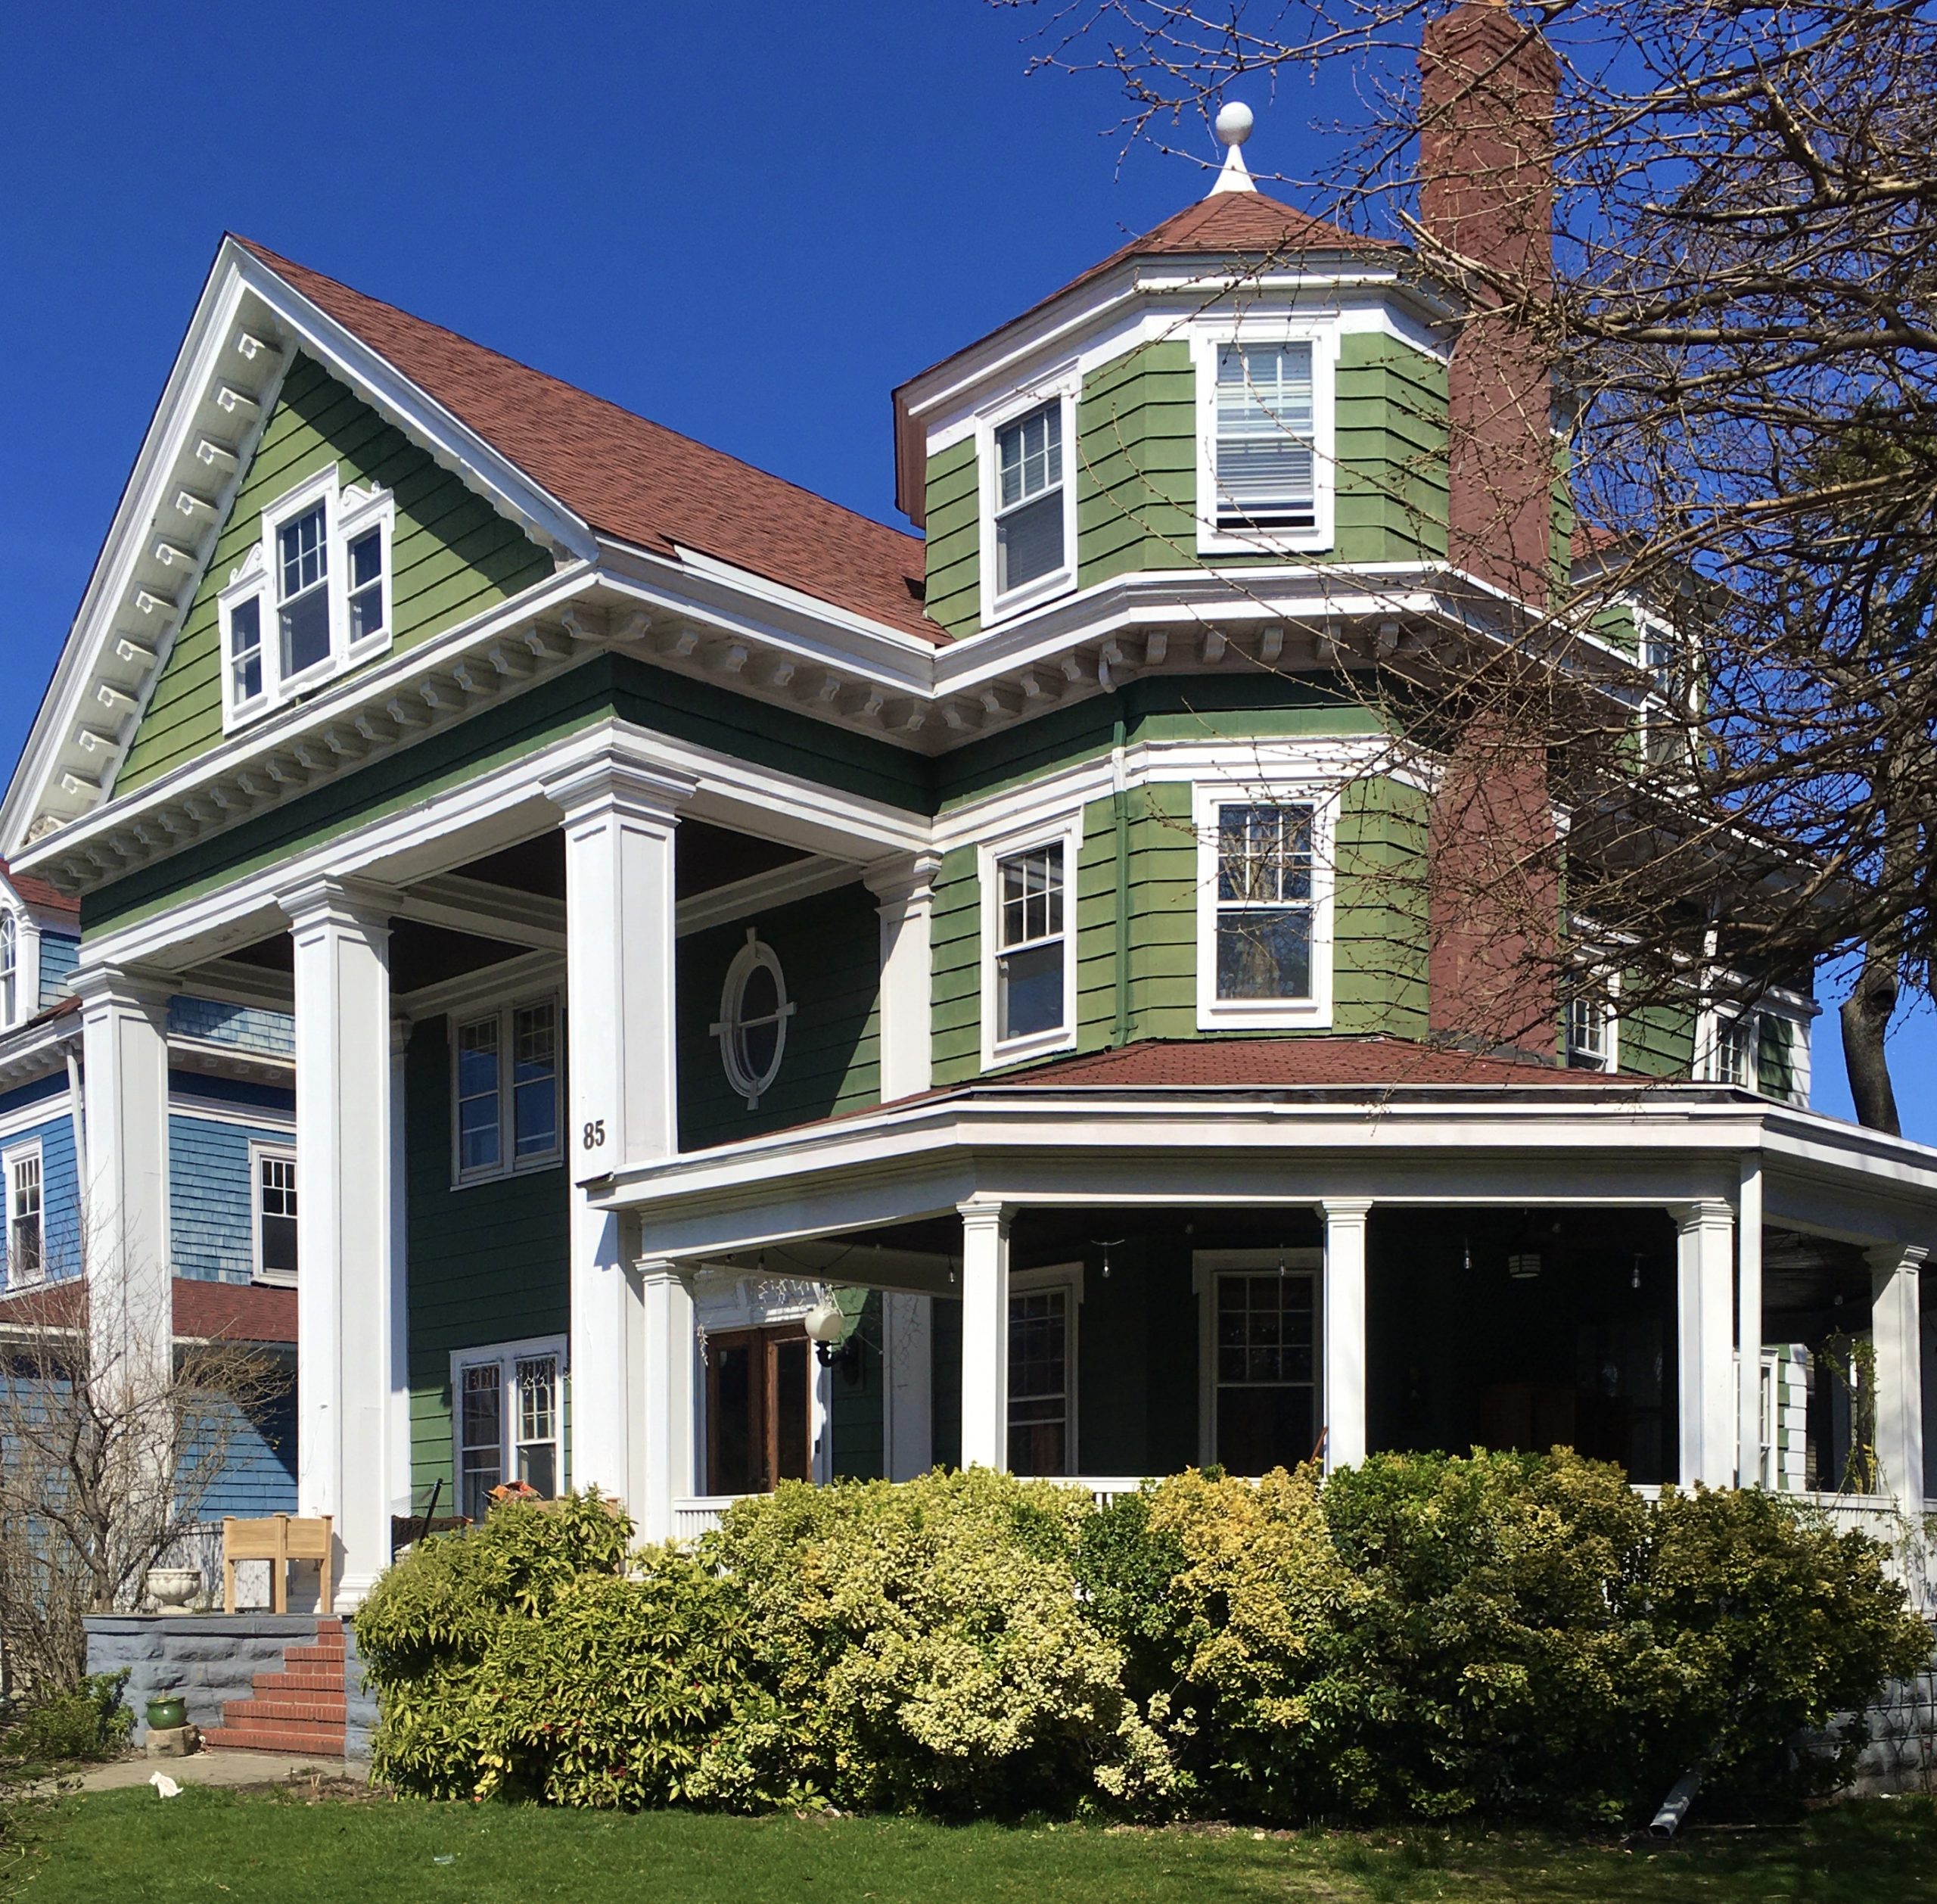 The house at 85 Westminster Road was sold in 2019. Photo: Lore Croghan/Brooklyn Eagle